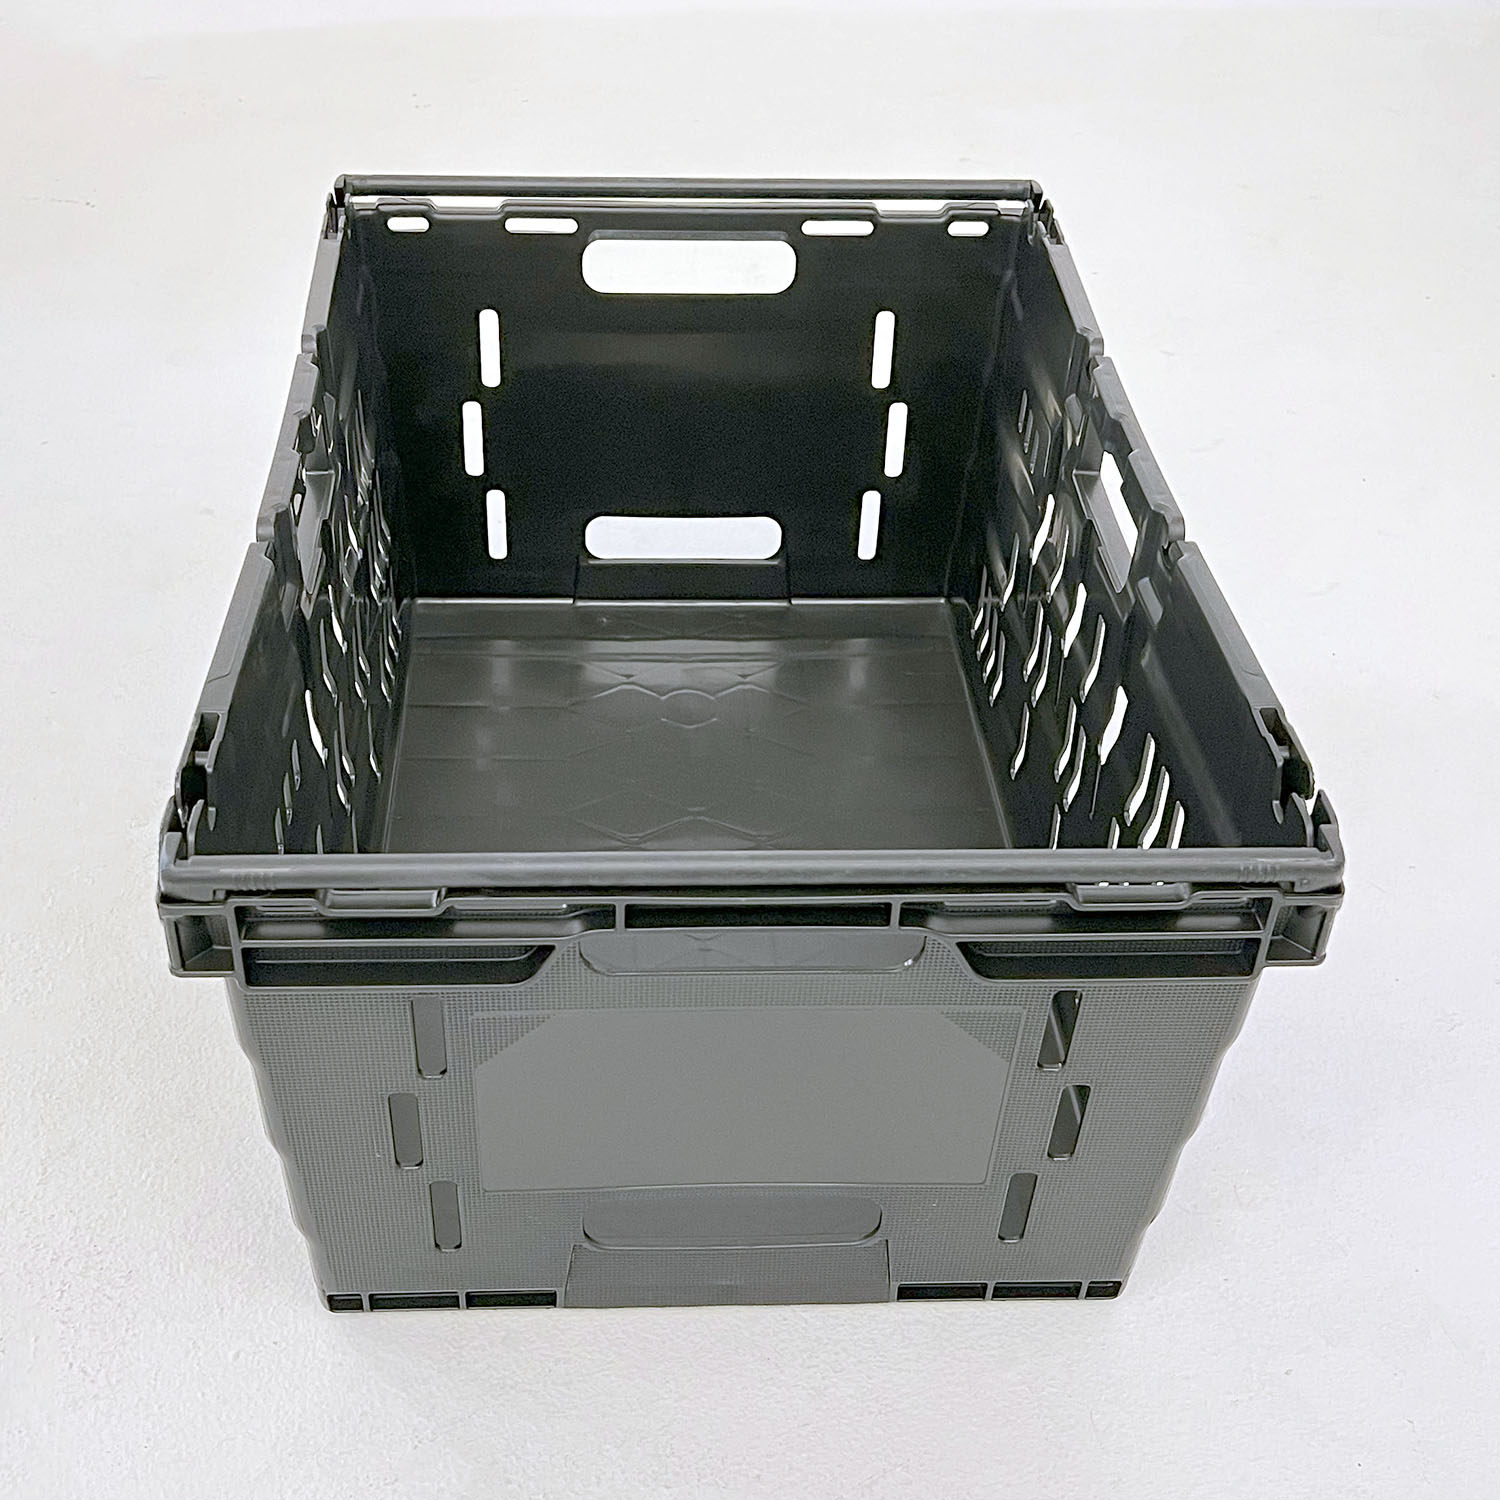 5000649_Together copy 5000640_Dividers Optimize Store Pick-Up Efficiency Nestable Tote Bins Store Pick-Up Program Multiple Orders Picking Errors Order Fulfillment Space-Saving Design Compact Stacking Storage Space Optimization Organizational Efficiency Clutter-Free Storage Durability Sturdy Construction Safe Transportation Structural Integrity Weight Capacity (18 lbs) Product Reliability Versatile Storage Stackable Design Storage Capacity Organizational Solutions Efficient Retrieval Order Picking Streamlined Pick-Up Process Customer Satisfaction Operational Efficiency Smart Investment Business Workflow Increased Efficiency Reduced Errors Overall Performance Workflow Optimization Productivity Enhancement Investment Benefits Tote Bin Solutions Neat Organization Facility Storage Smart Storage Solutions Enhanced Workflow Space-Efficient Storage Order Management Productive Pick-Up Reliable Storage Organization Enhancement Productivity Boost Pick-Up Program Enhancement Efficient Tote Utilization Order Consolidation Workflow Streamlining Customer Order Management